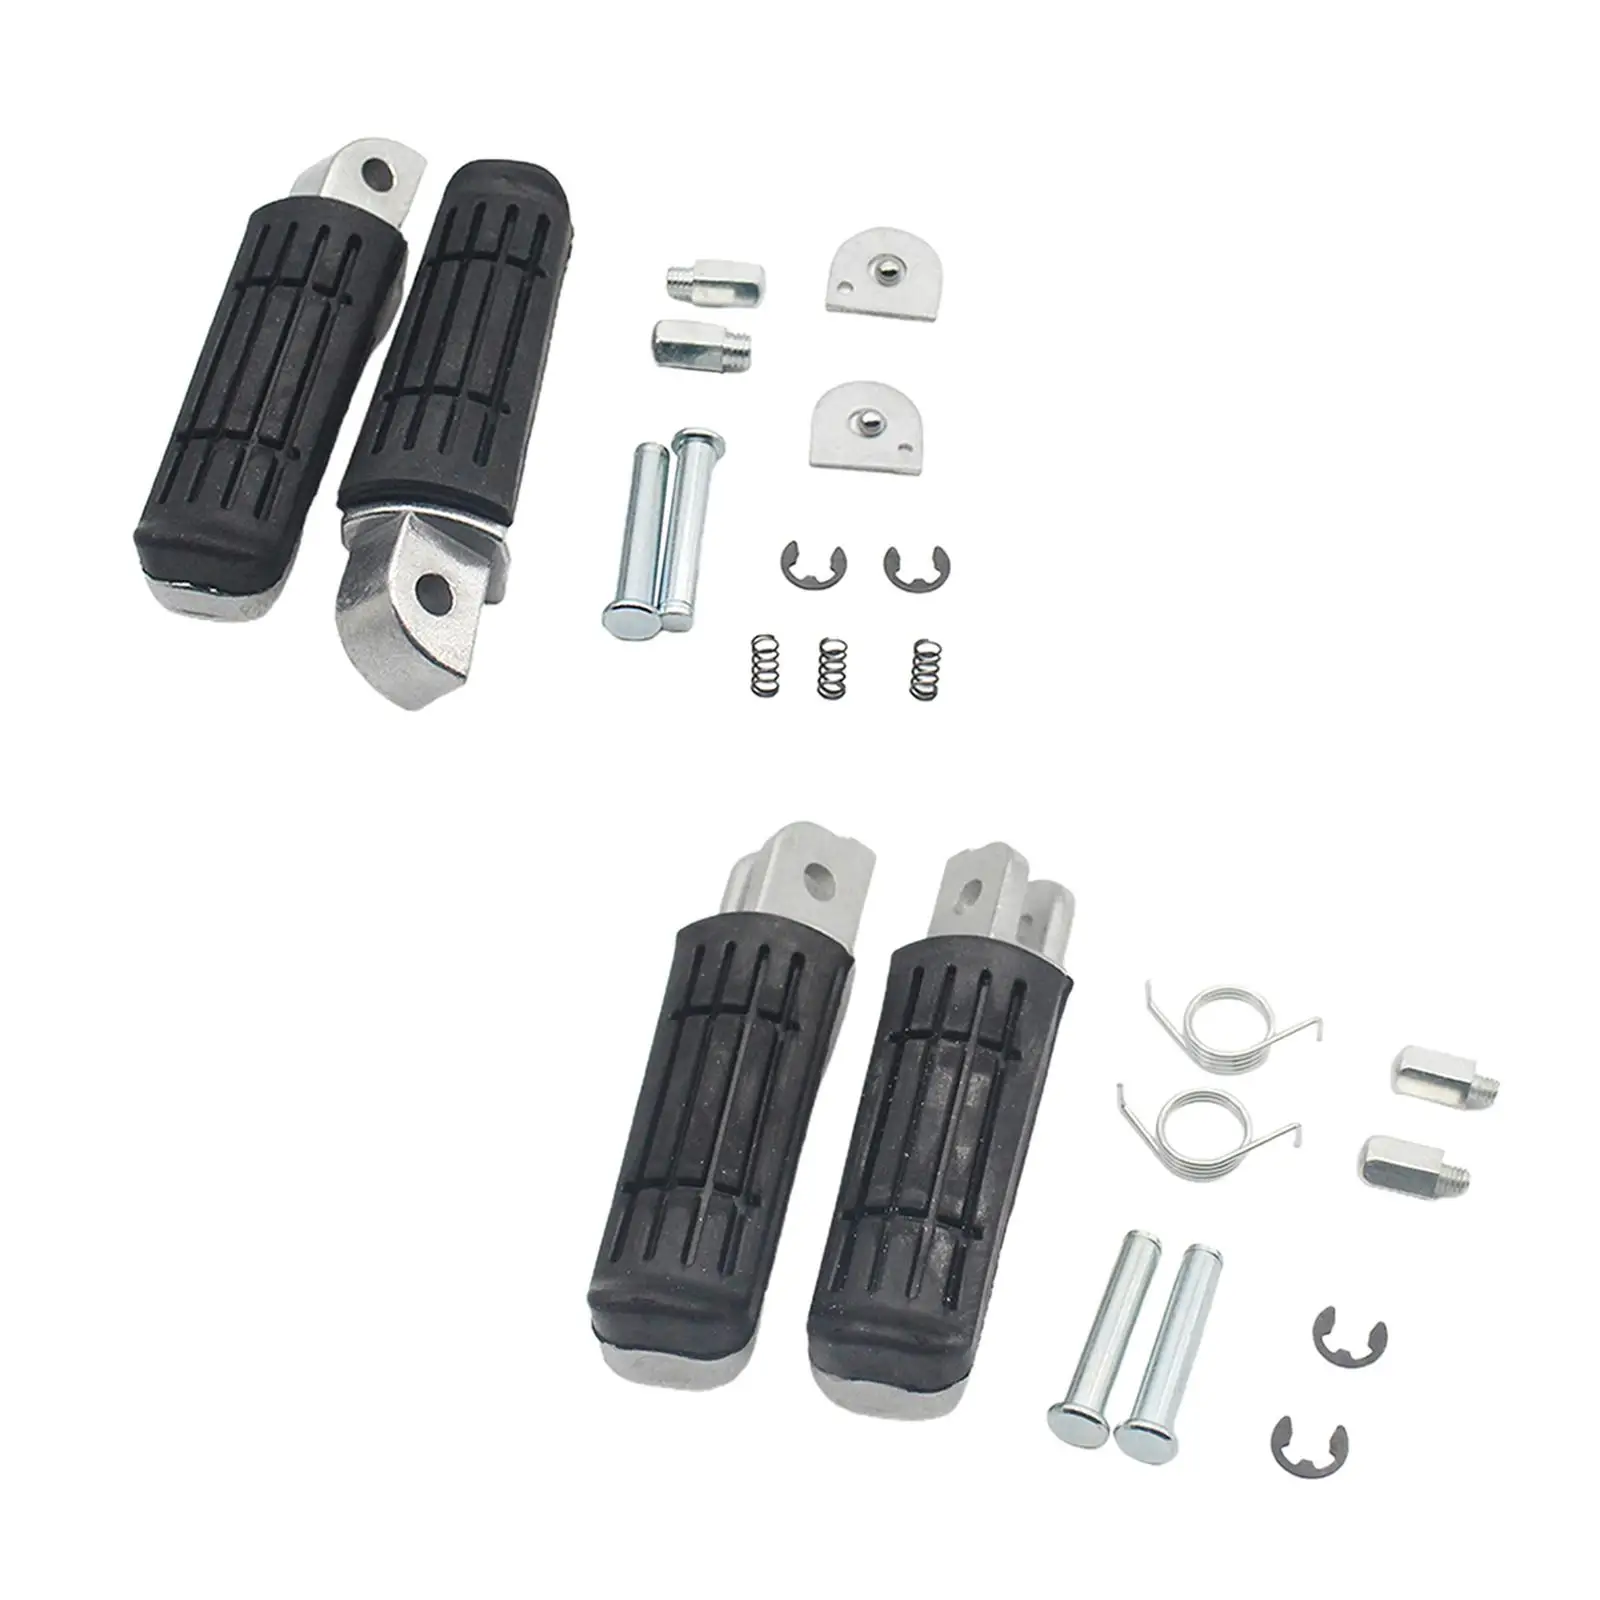 Pair Motorcycle Foot Pegs Footrest Compatible with YZF1000 R1 FZ6R FZ6 FJR1300